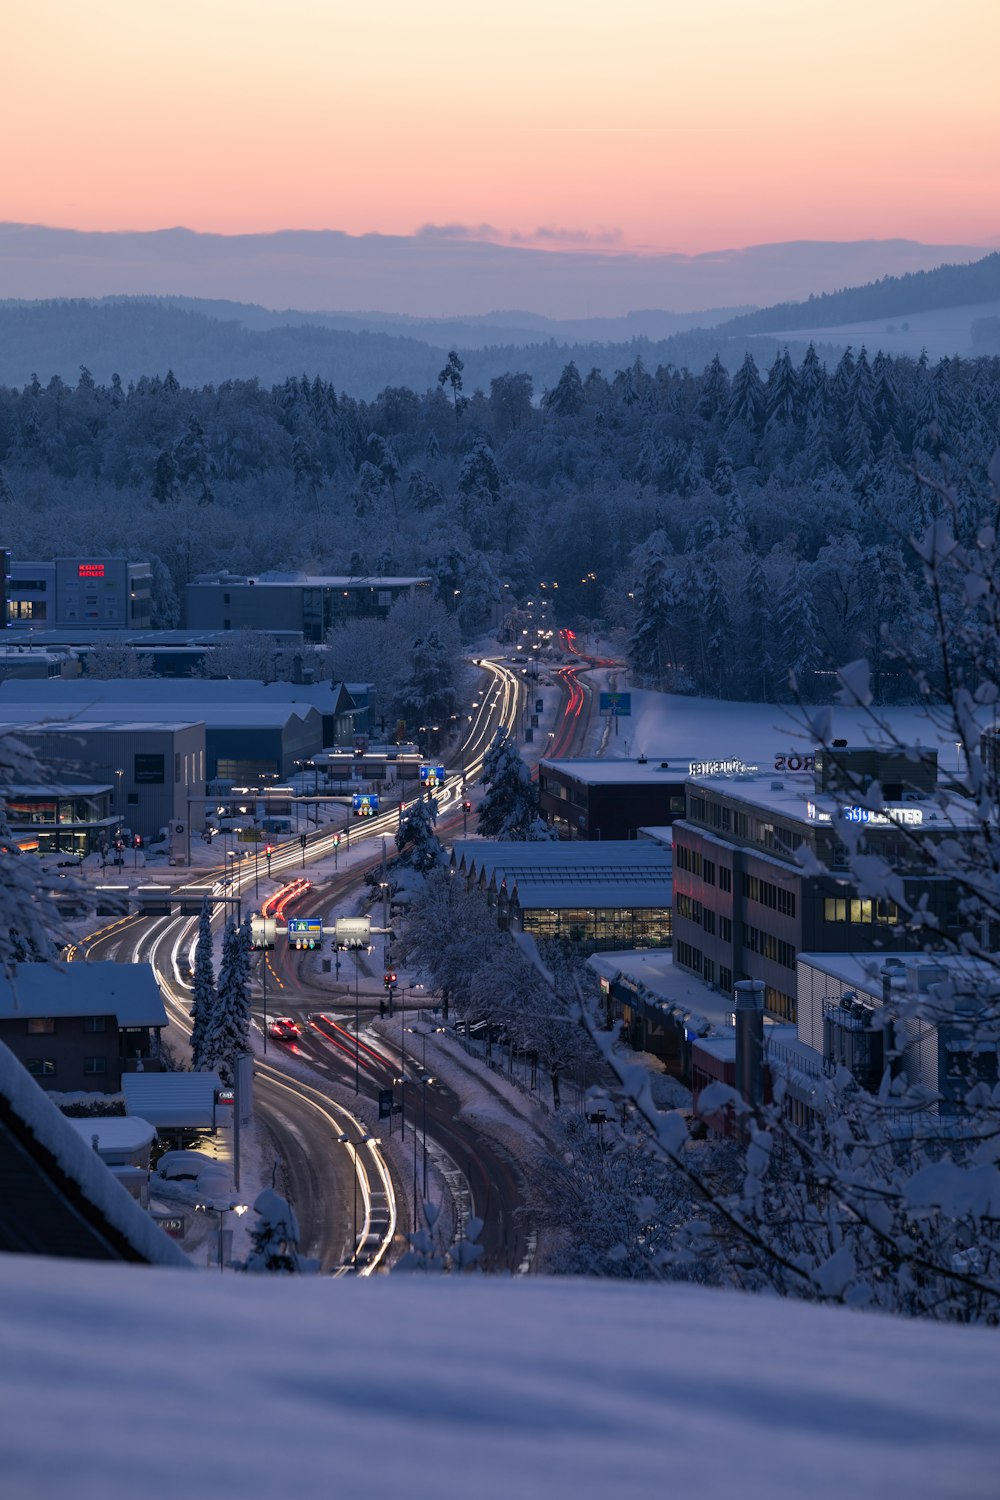 a view of a snowy city at dusk